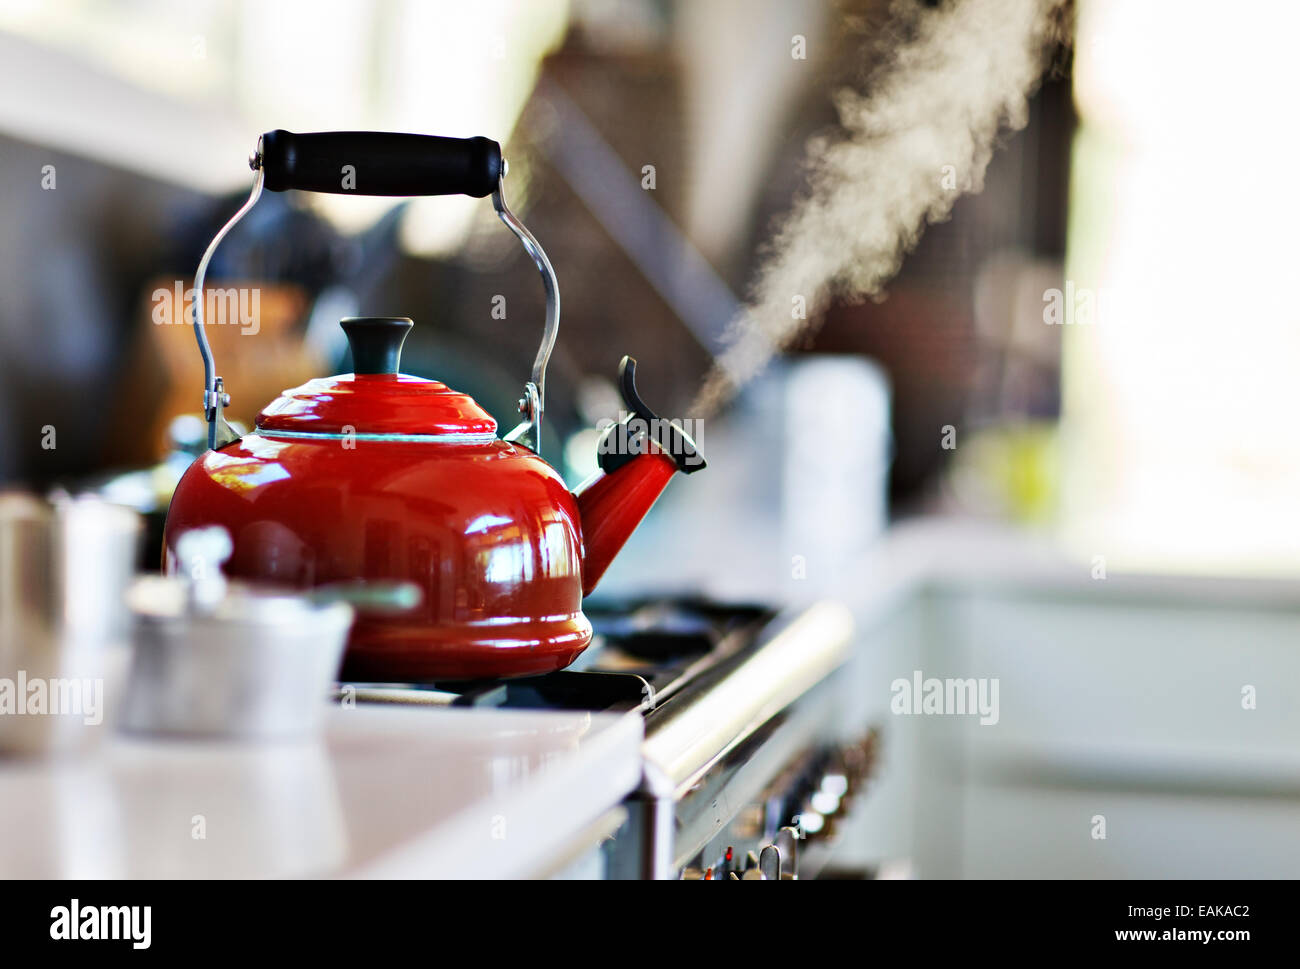 Red old fashion kettle on cooker with steam coming out Stock Photo